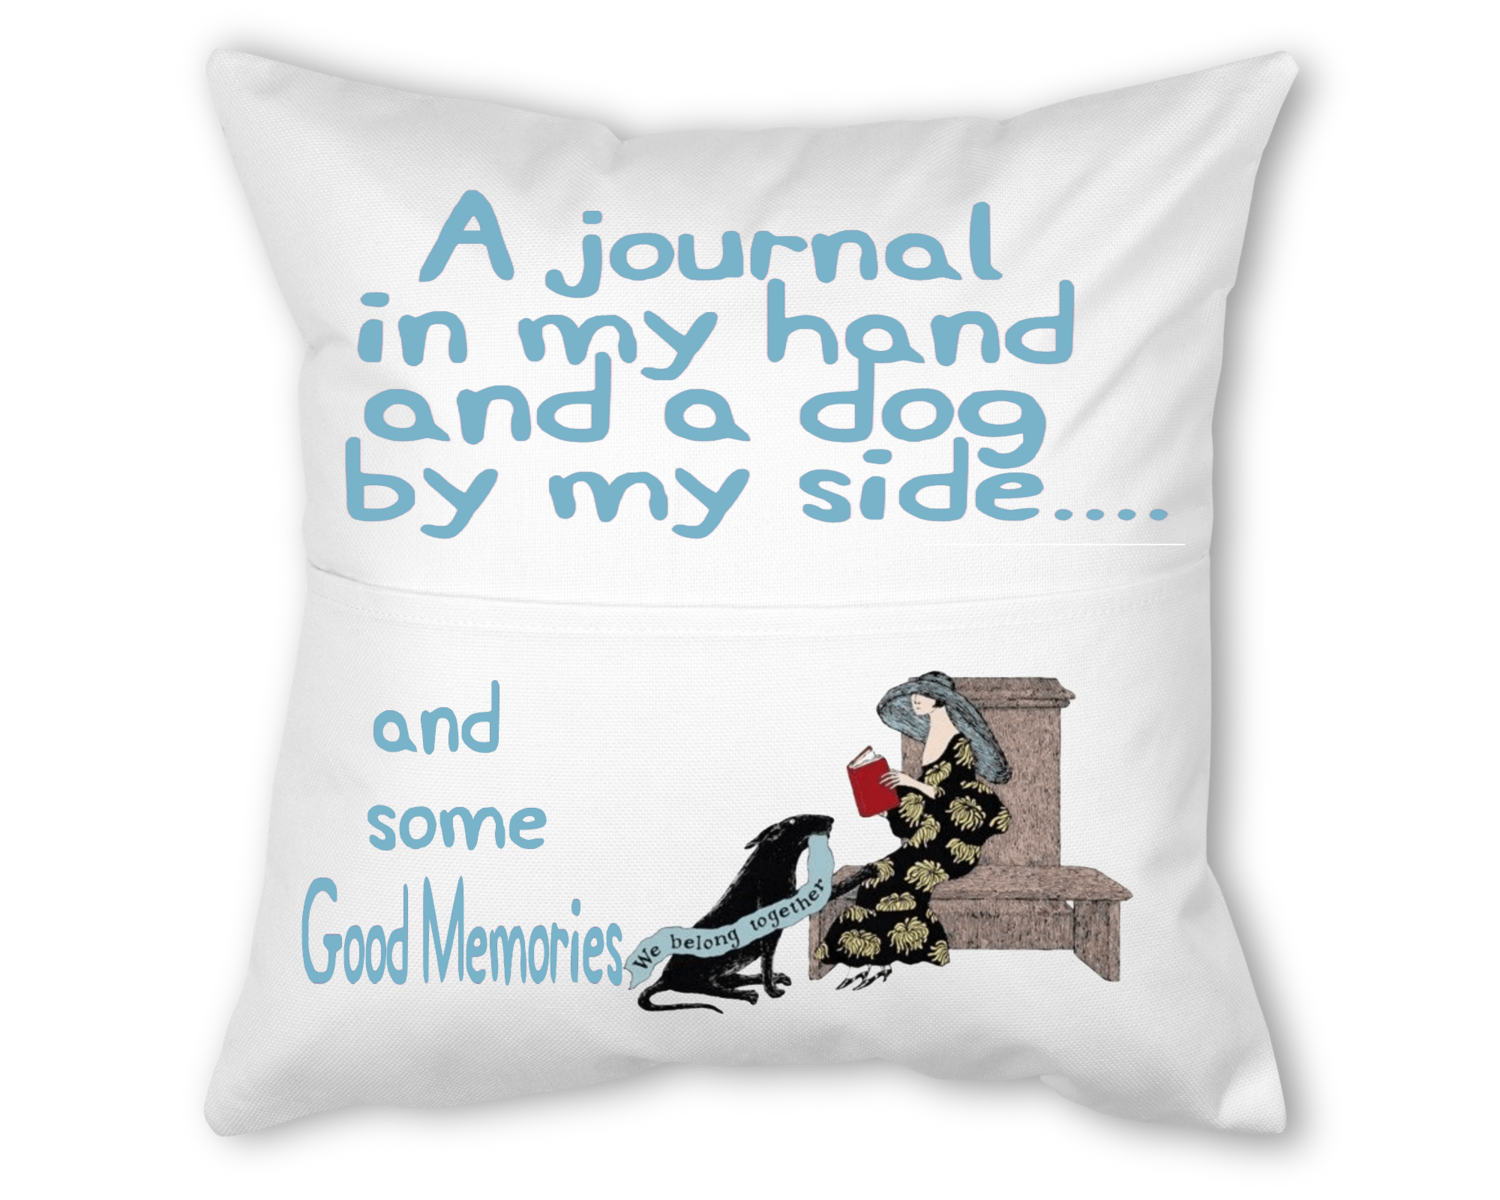 Crafting Pillow With Pocket: A JOURNAL IN MY HAND AND A DOG BY MY SIDE....AND SOME GOOD MEMORIES